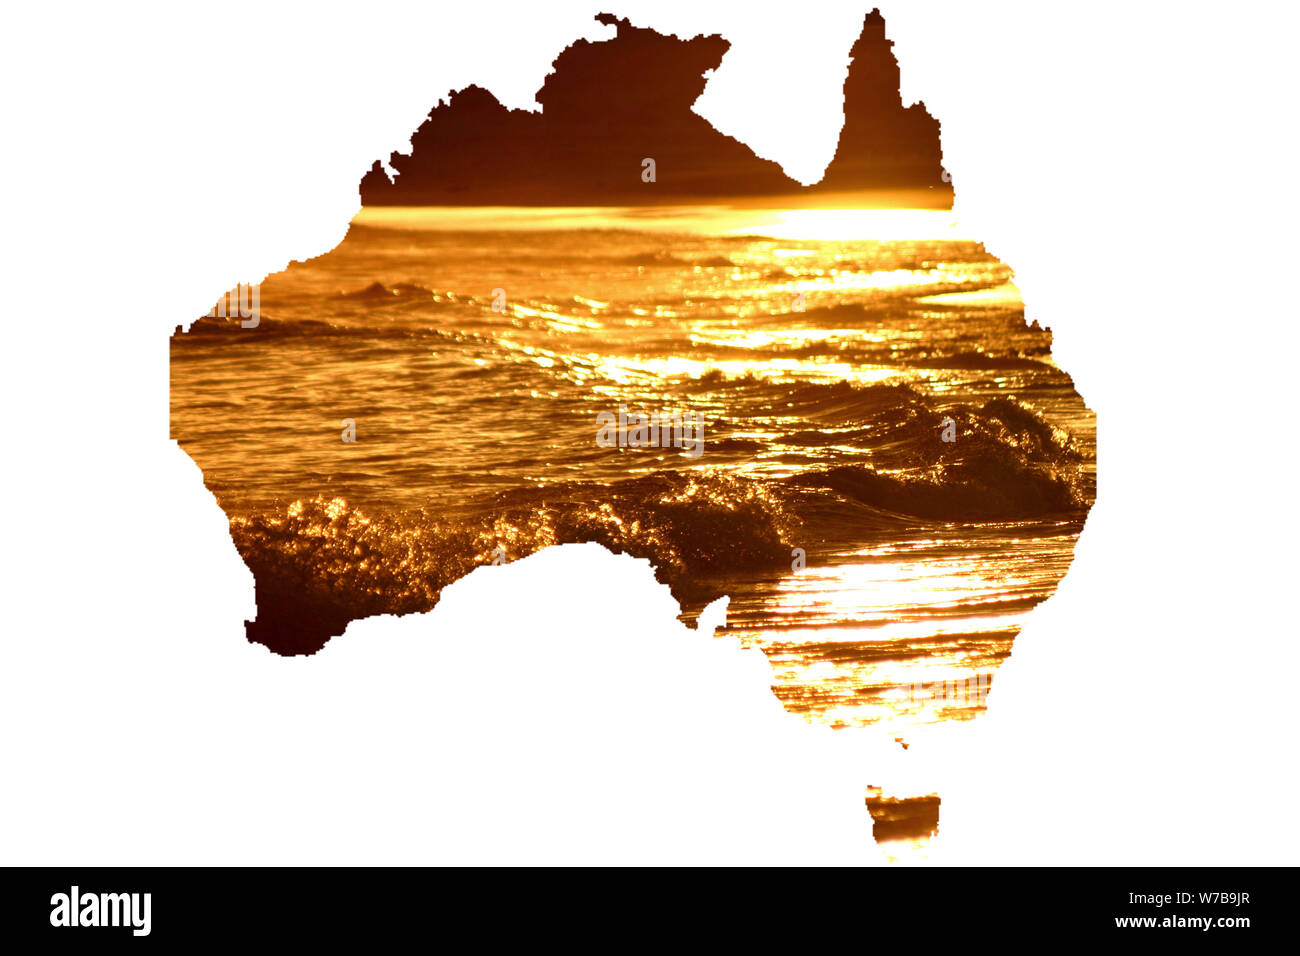 An outline of Australia with an image of a sunset in the center. Golden Soil part of National anthem. Stock Photo